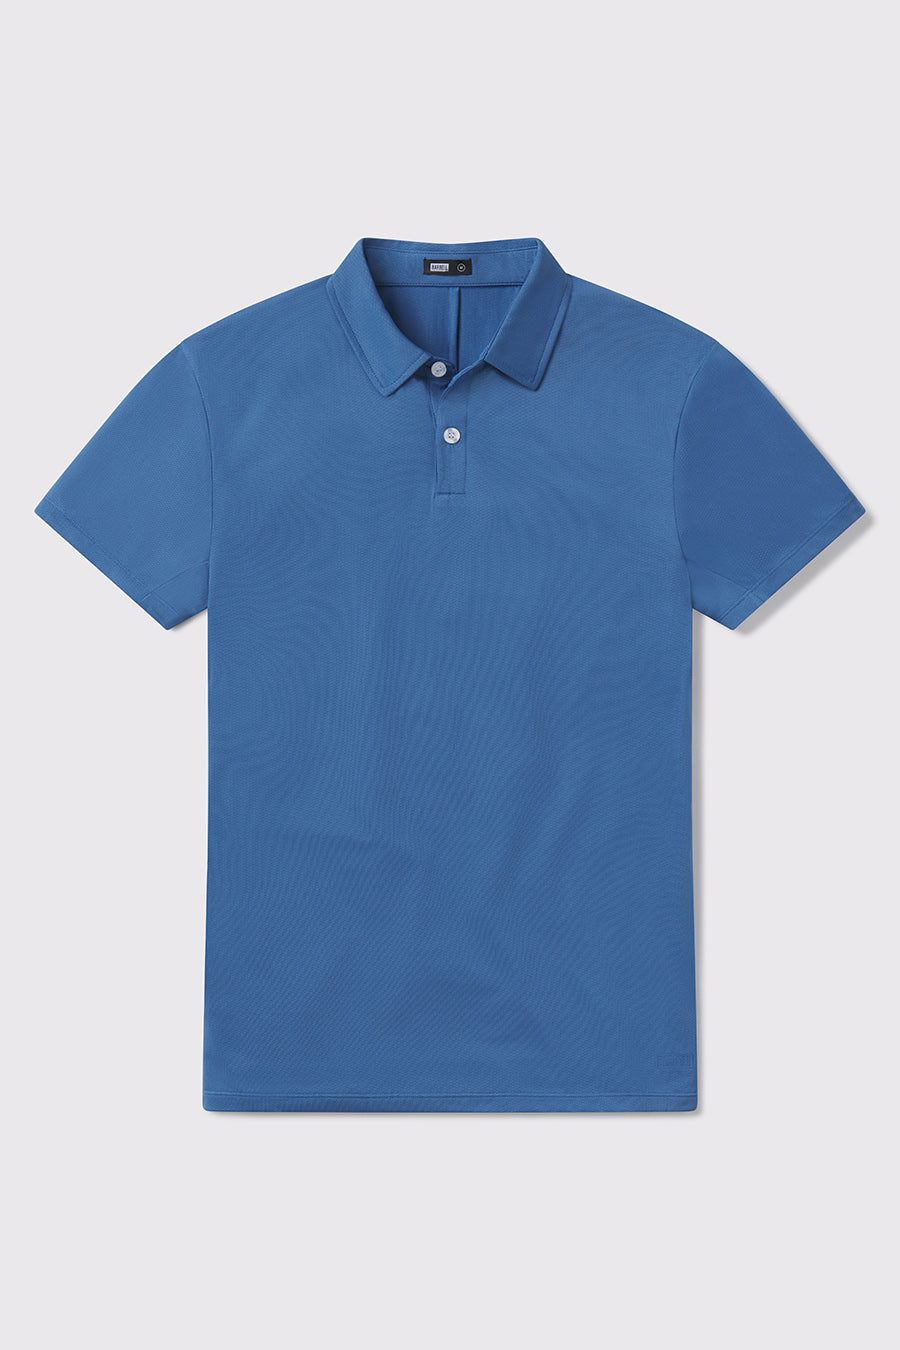 Ultralight Polo -Karlberry Blue - photo from front flat lay #color_karlberry-blue